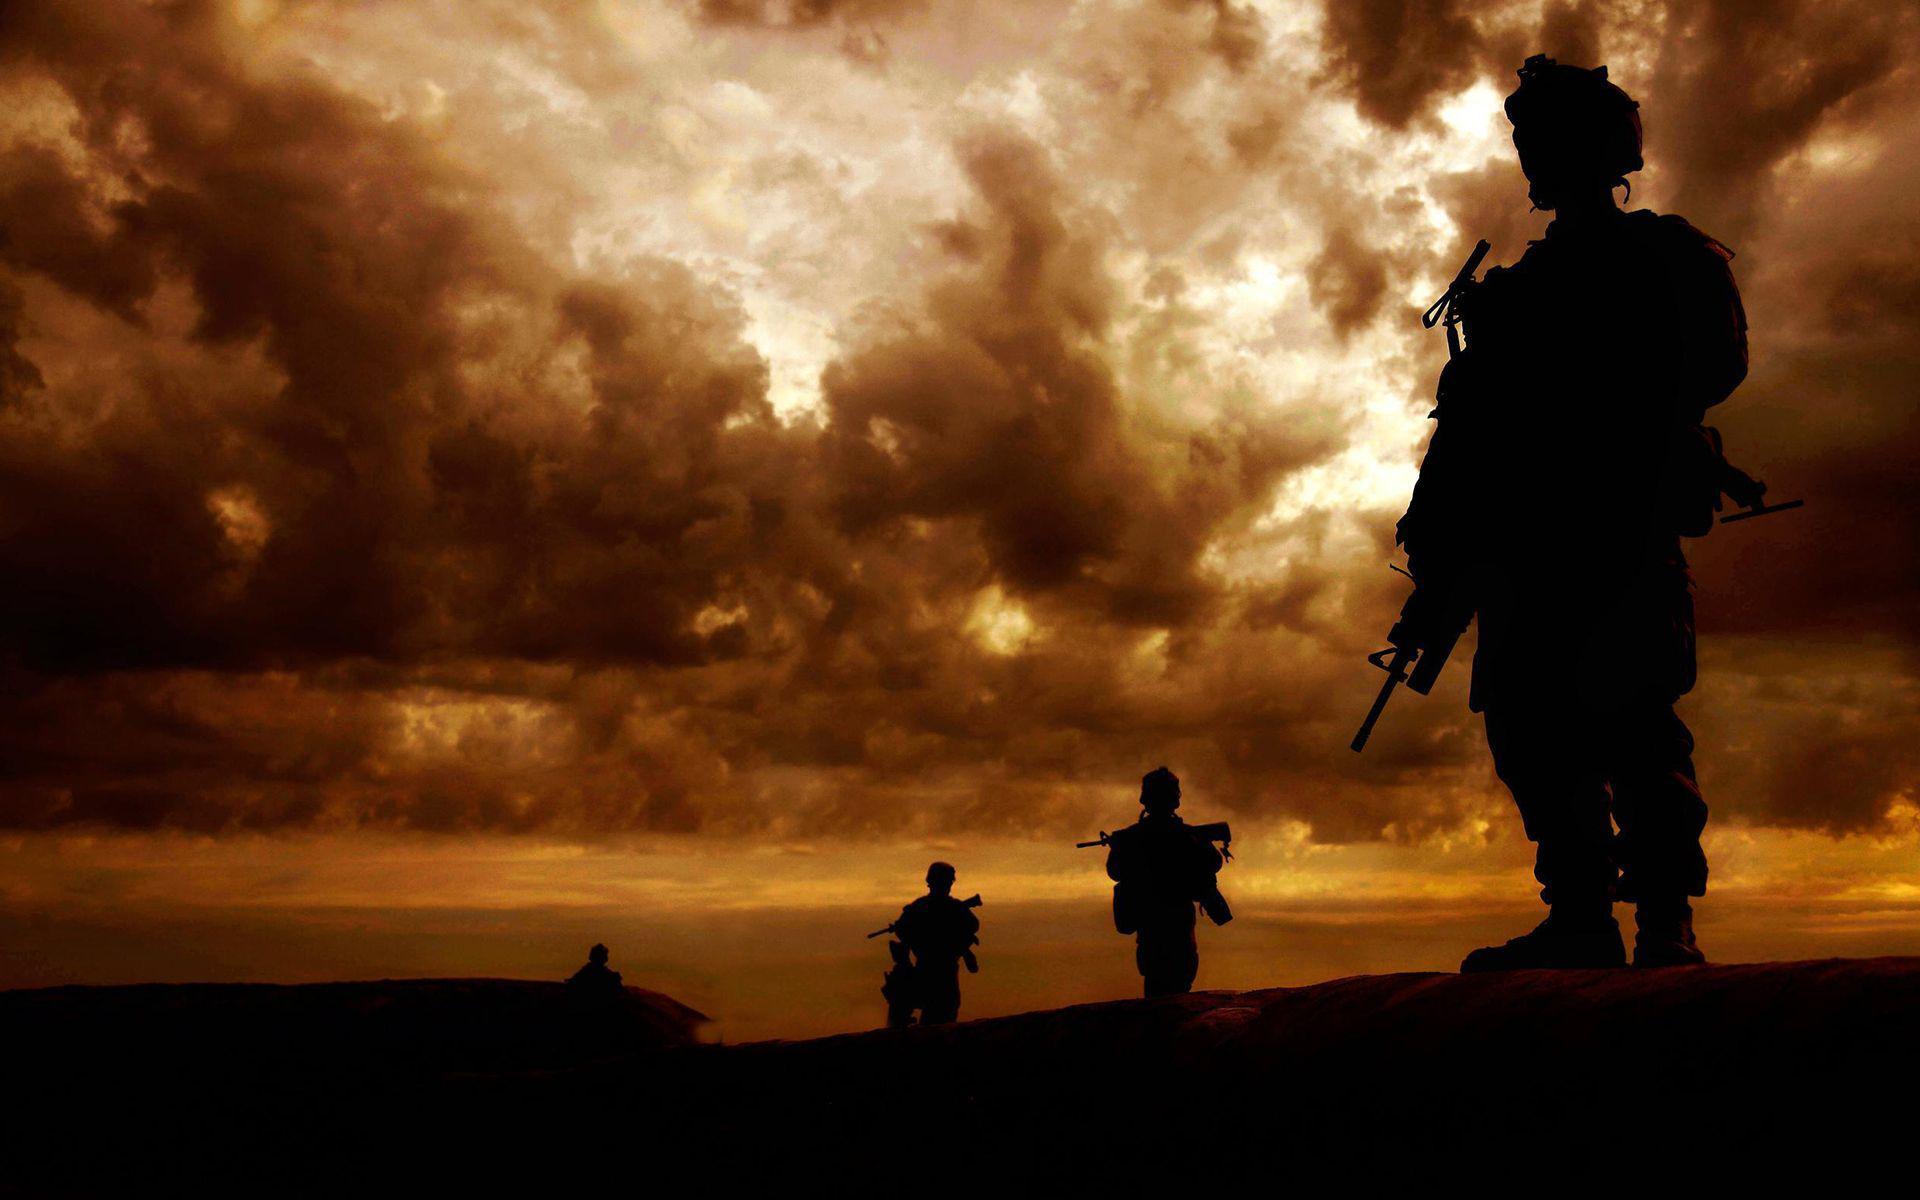 Soldier silhouettes wallpaper | nature and landscape | Wallpaper Better